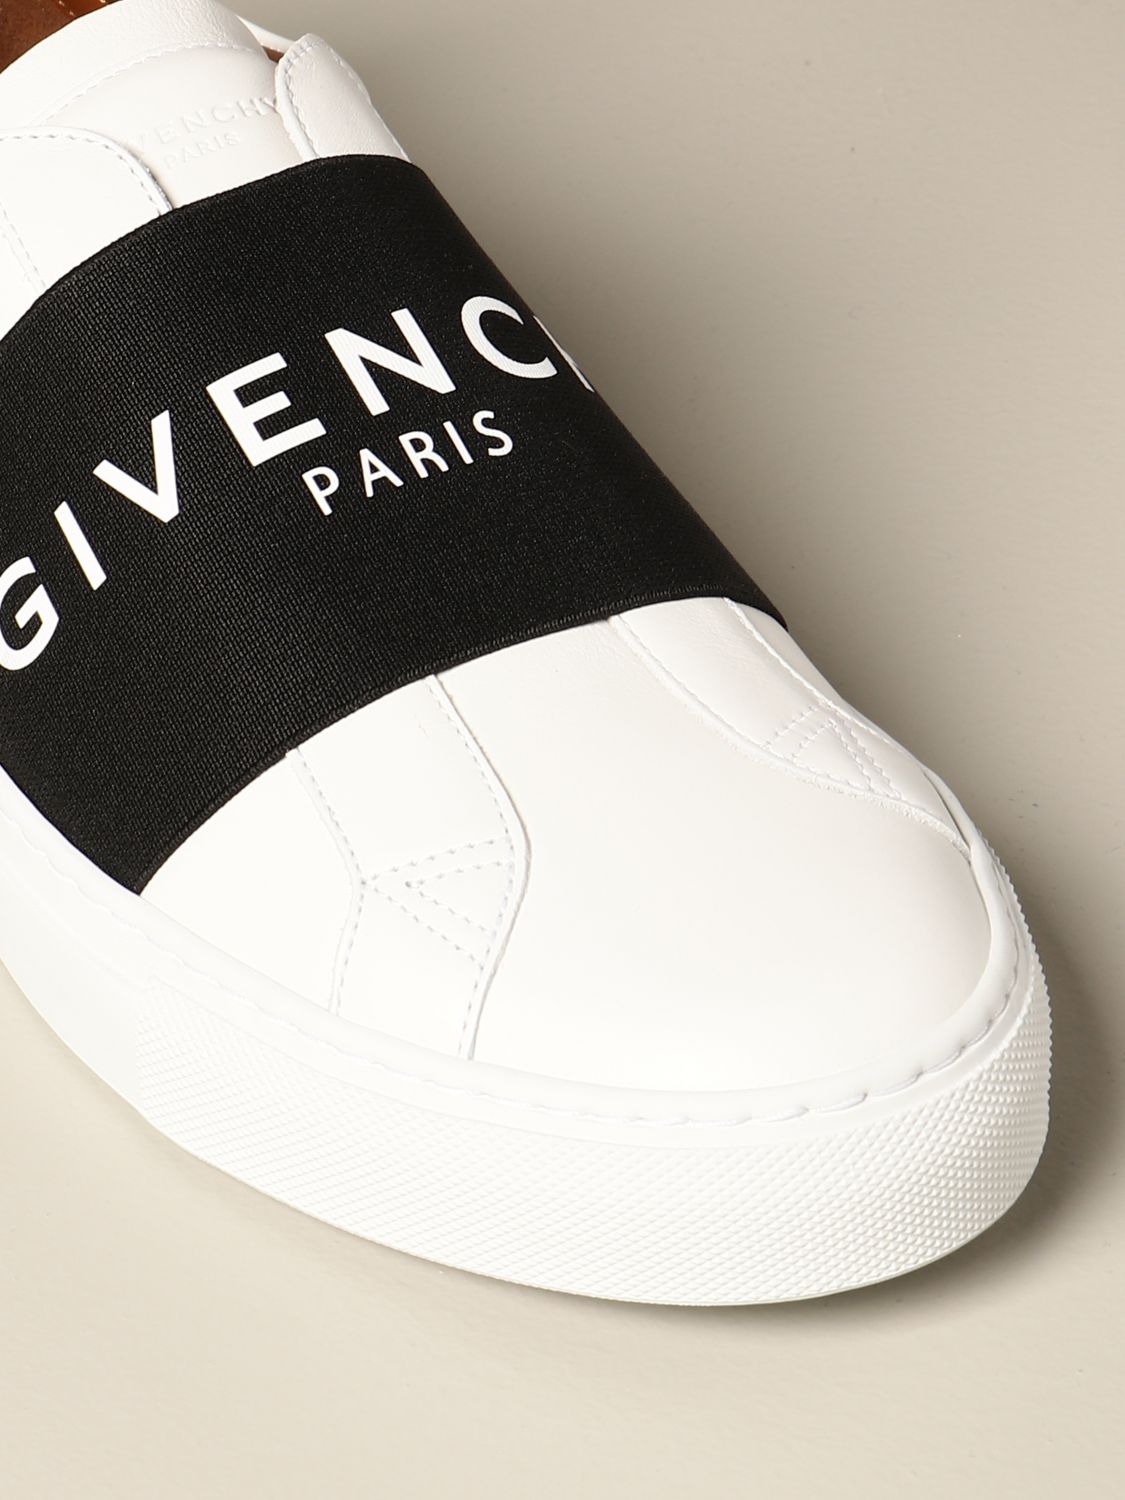 sneakers givenchy hombre